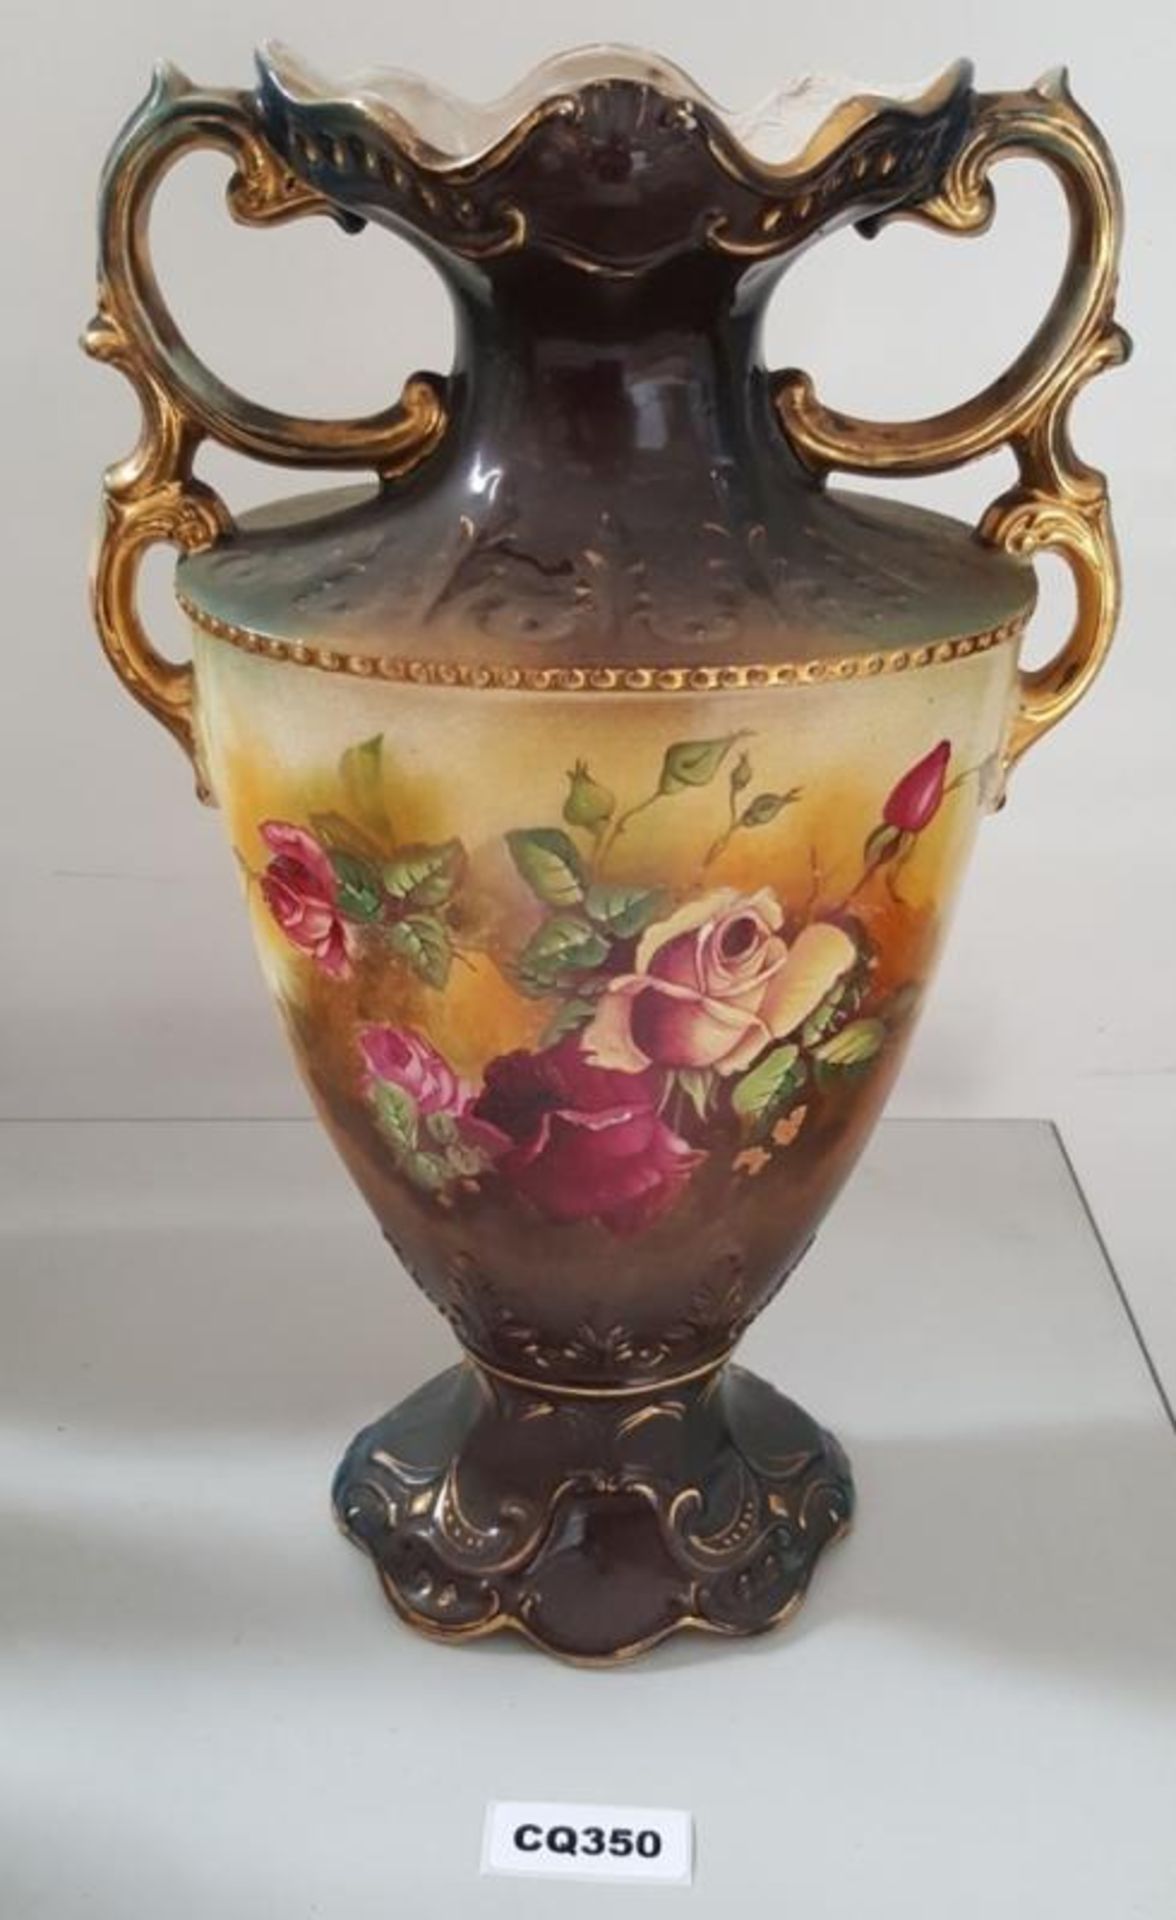 1 x Antique Victorian Porcelain Vase Trophy Shaped In Dark Shade With A Flower Print( Made In Englan